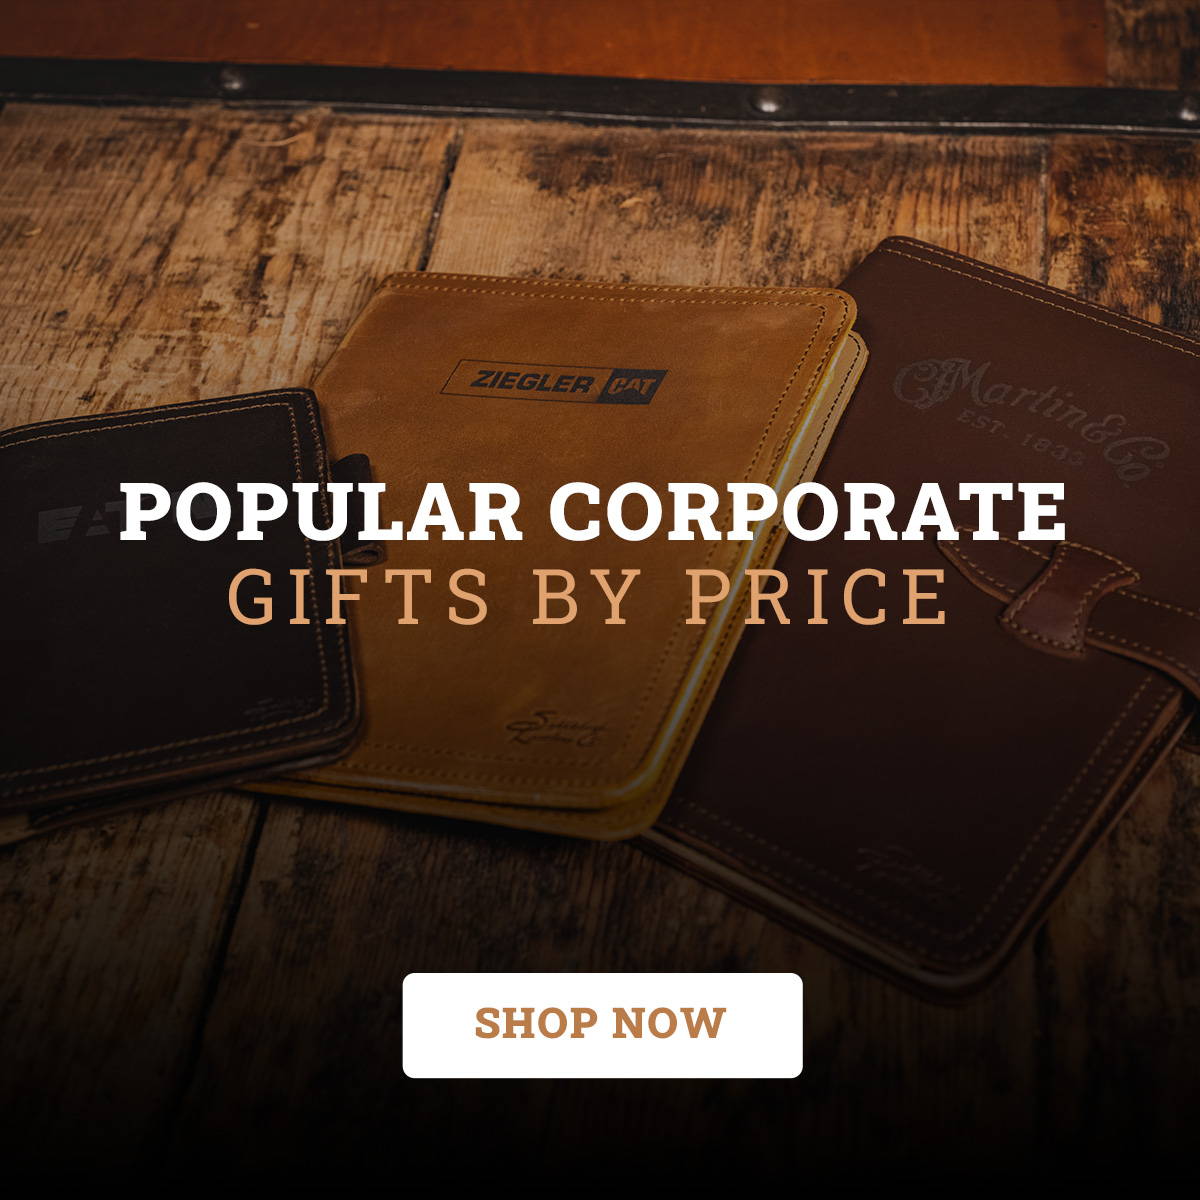 Popular Corporate Gifts by Price